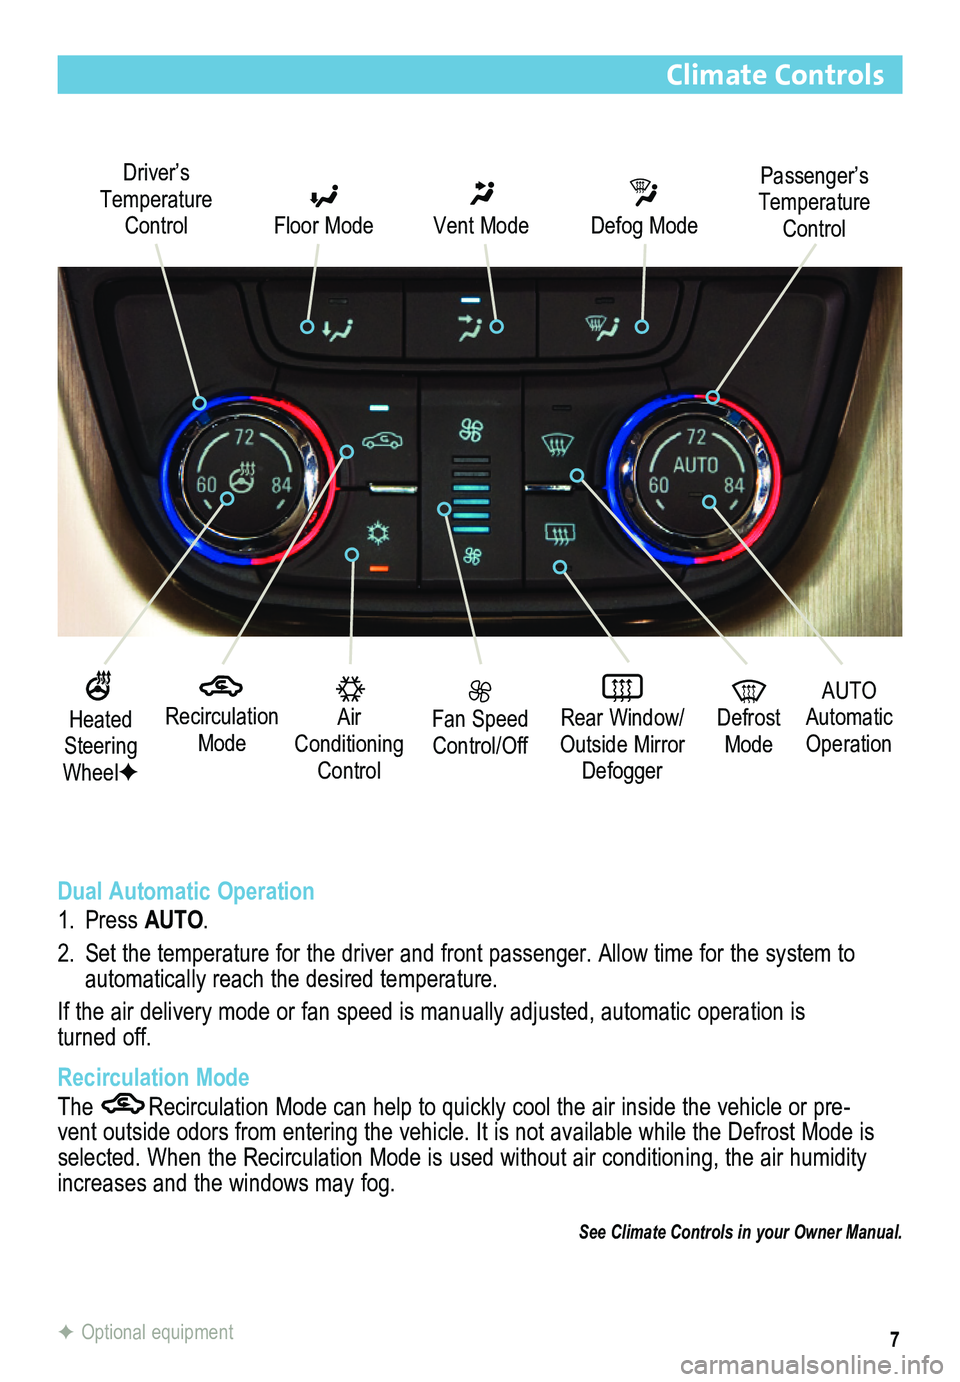 BUICK VERANO 2013  Get To Know Guide 7
Climate Controls
 
Recirculation Mode
Driver’s Temperature Control  Floor Mode
 Vent Mode
 Defog Mode
 Fan Speed Control/Off
 Rear Window/ Outside Mirror Defogger
  Air Conditioning Control
AUTO 
